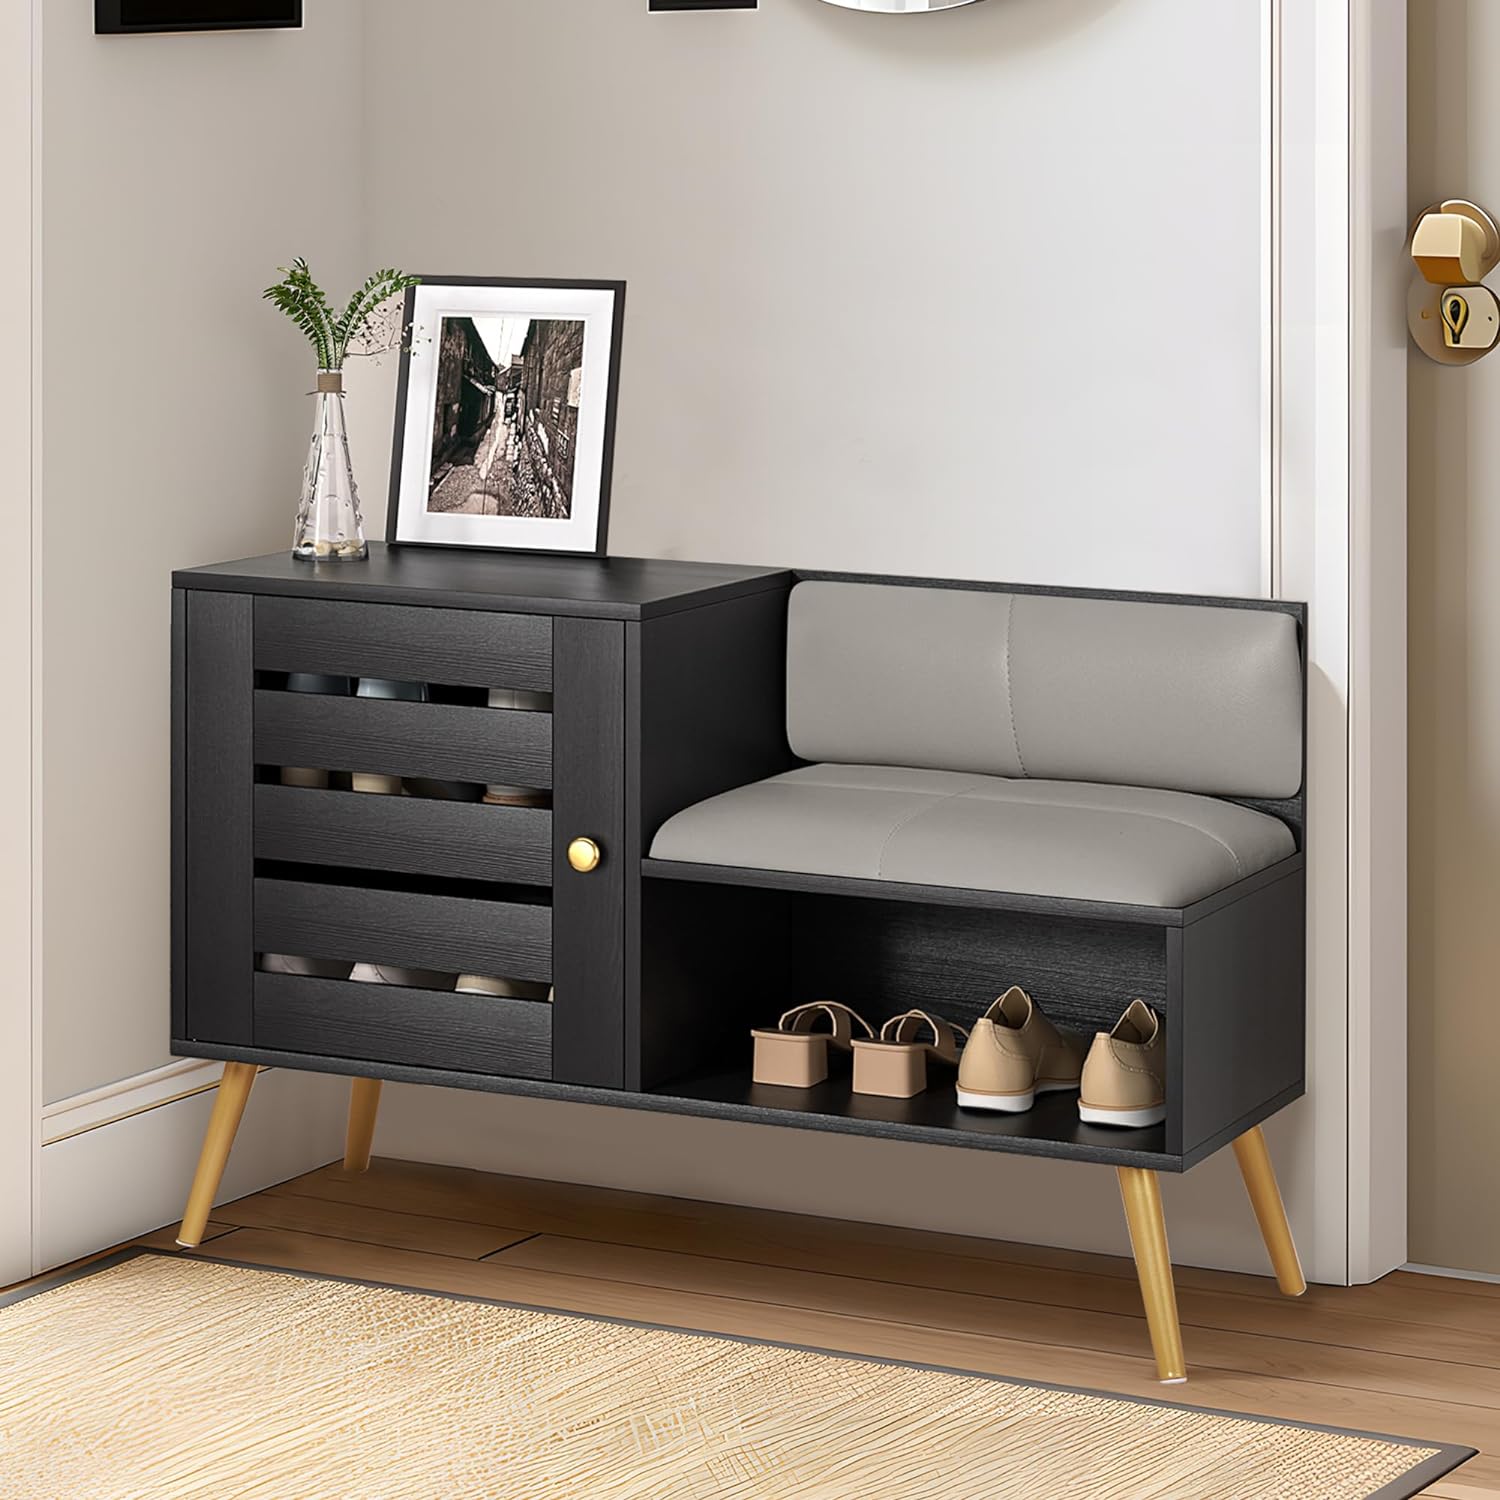 VECELO Entryway Bench with Storage Shoe Cabinet & Adjustable Shelf Louvered Door Removable PU Seat Cushion and Backrest